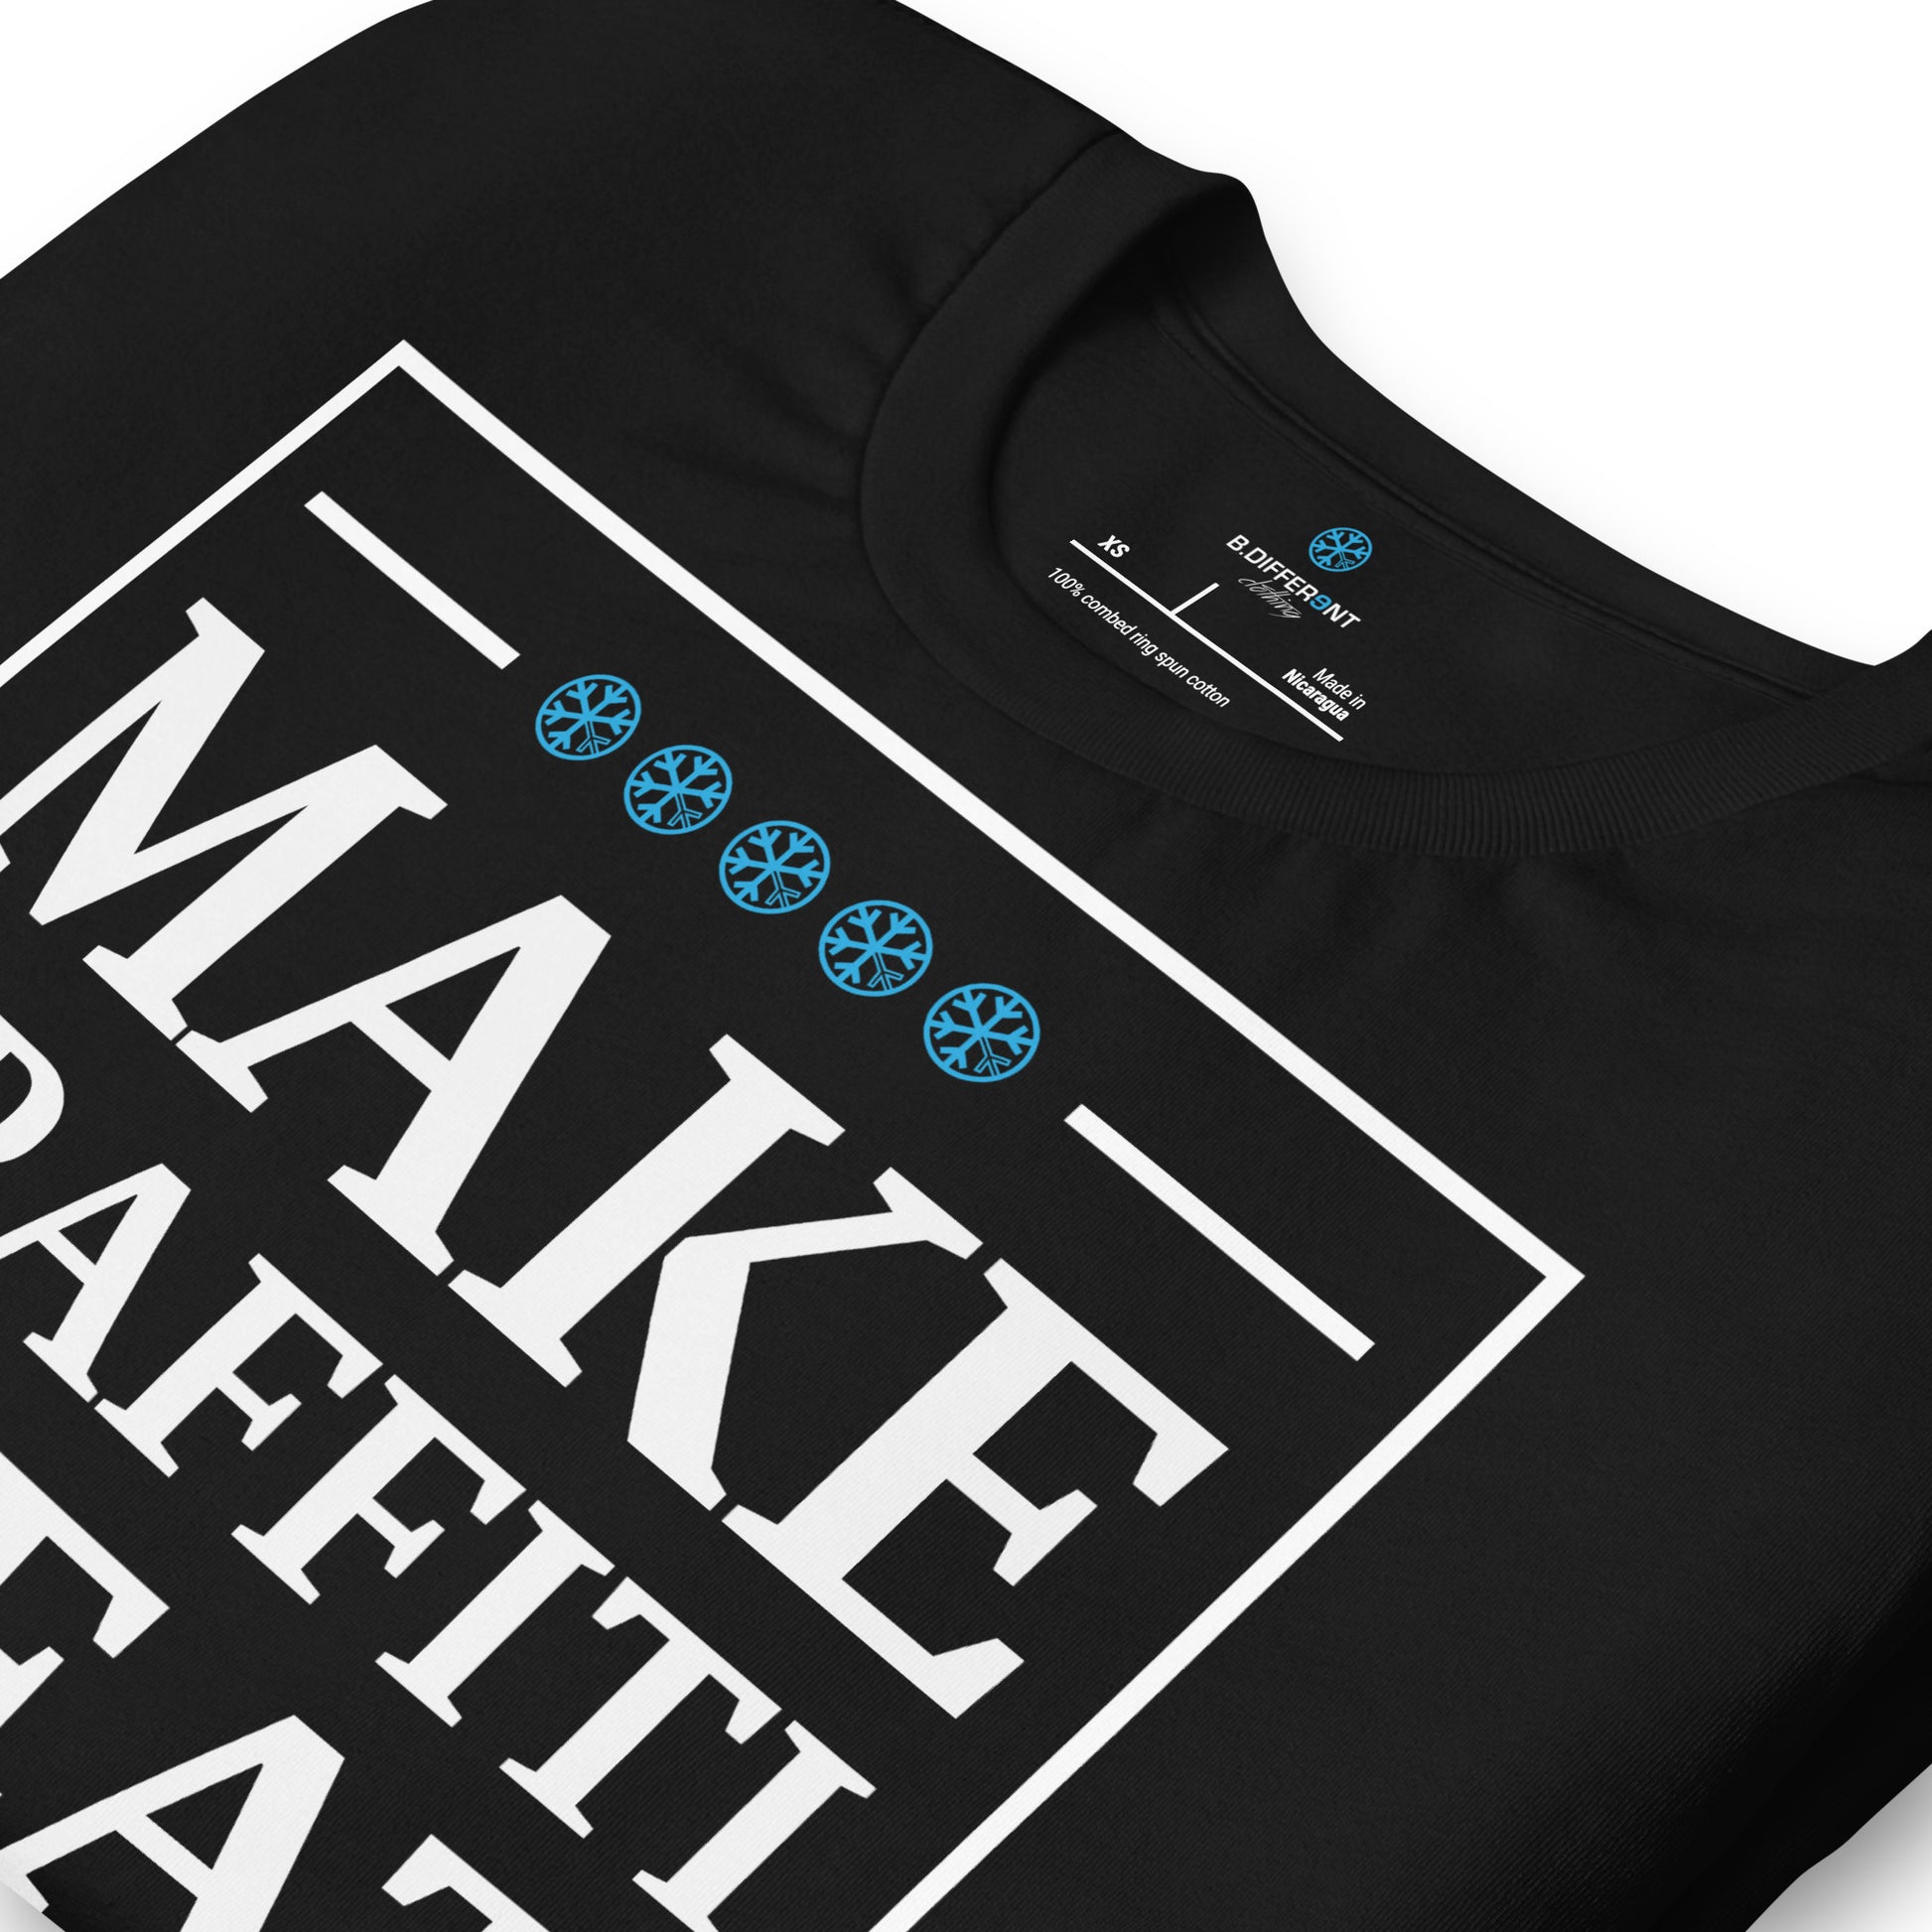 detail of make graffiti great again tee black by b.different clothing graffiti and street art inspired streetwear brand for weirdos, misfits, and outcasts.